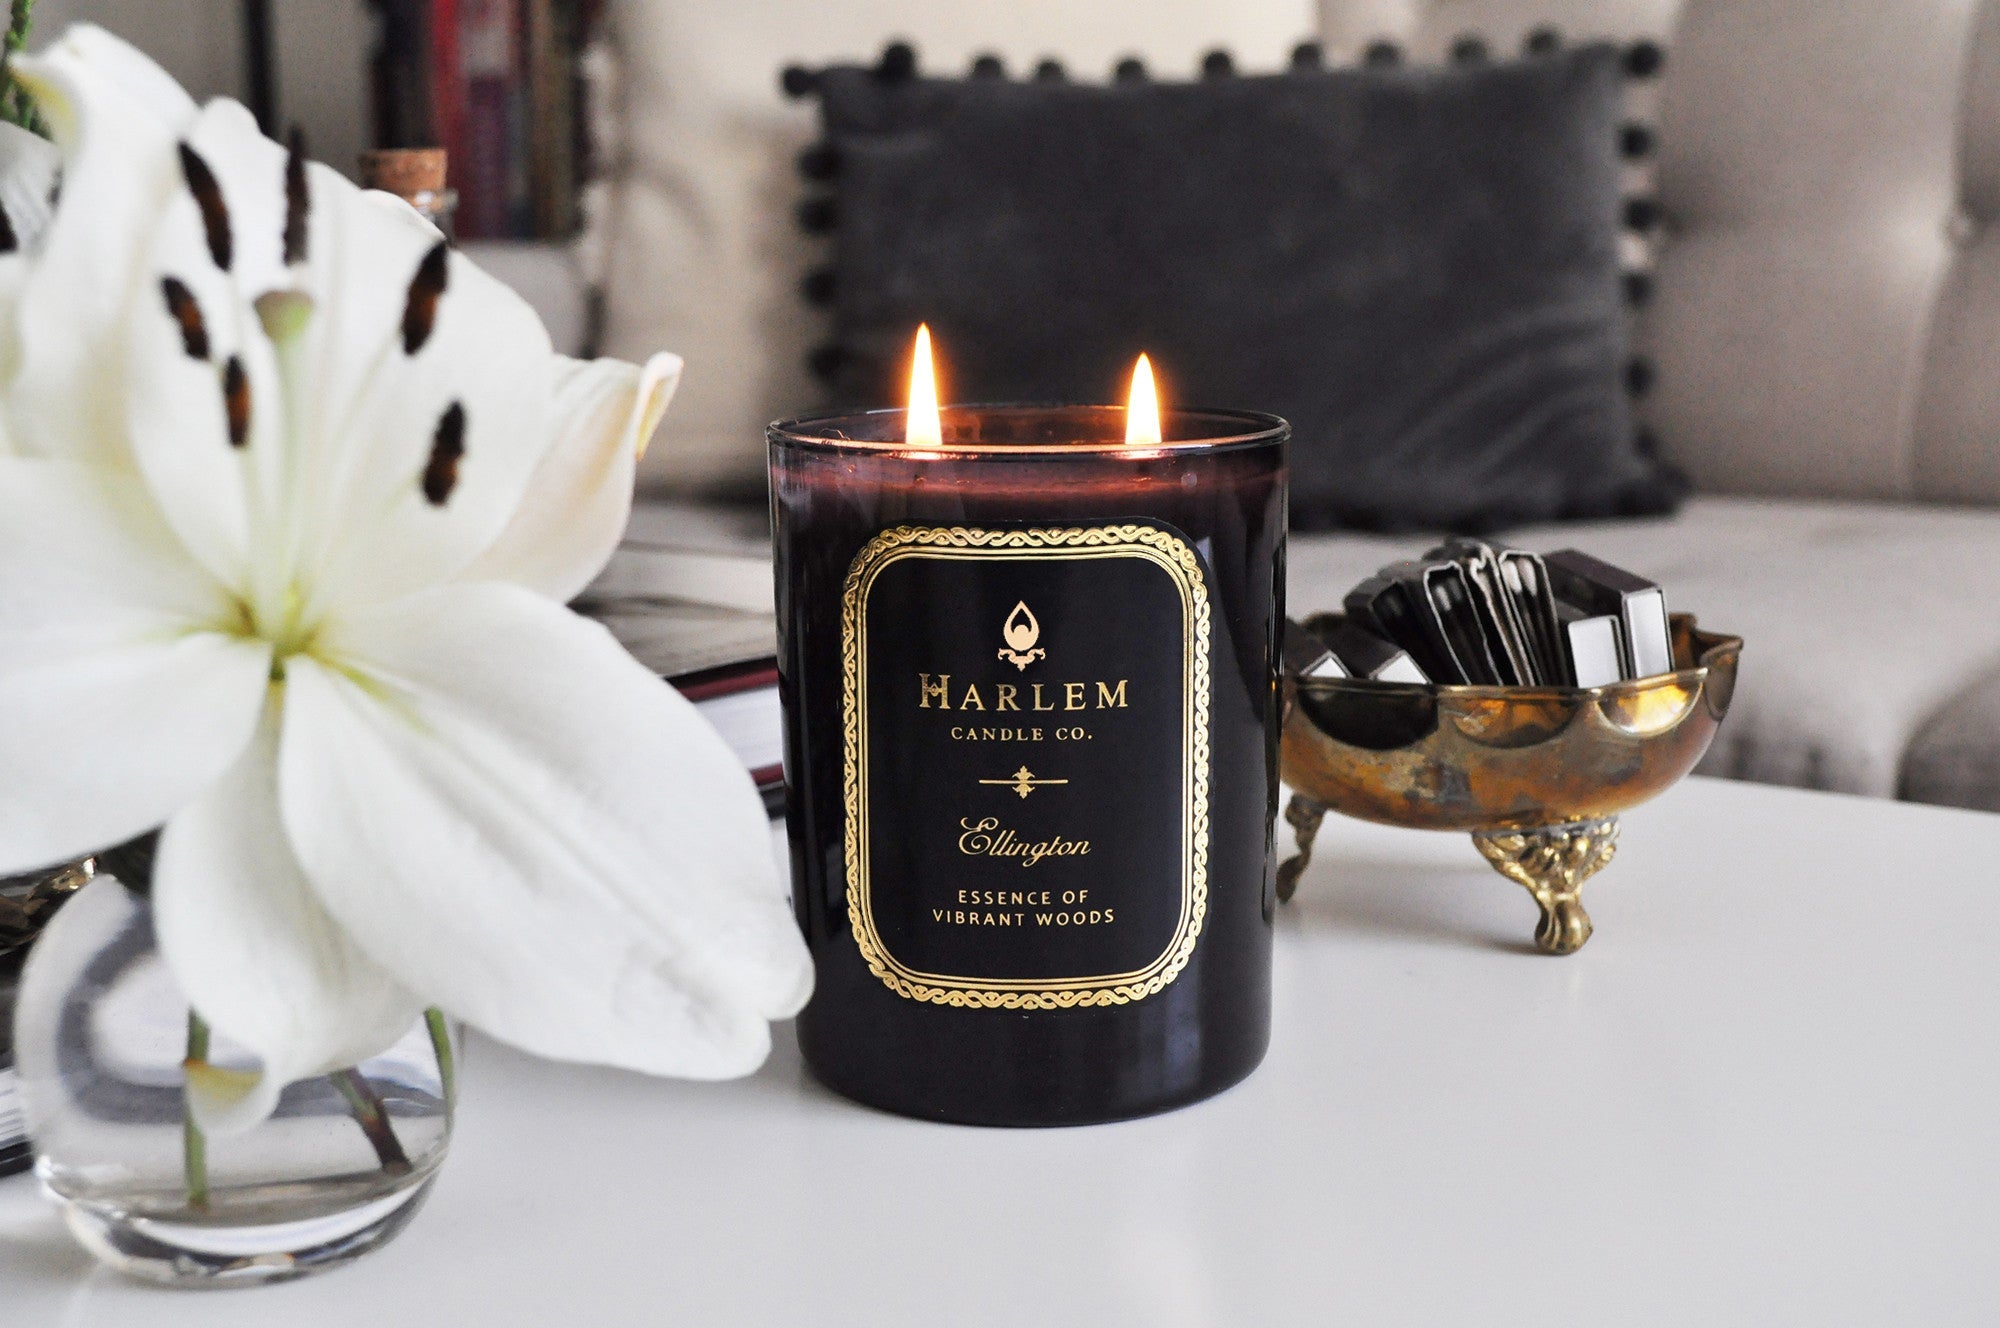 A stunning lifestyle image of our lit black Ellington 12 oz 2 wick candle sitting on a coffee table next to a vase of white flowers, a gold bowl of matches with a couch and black pillow in the background.